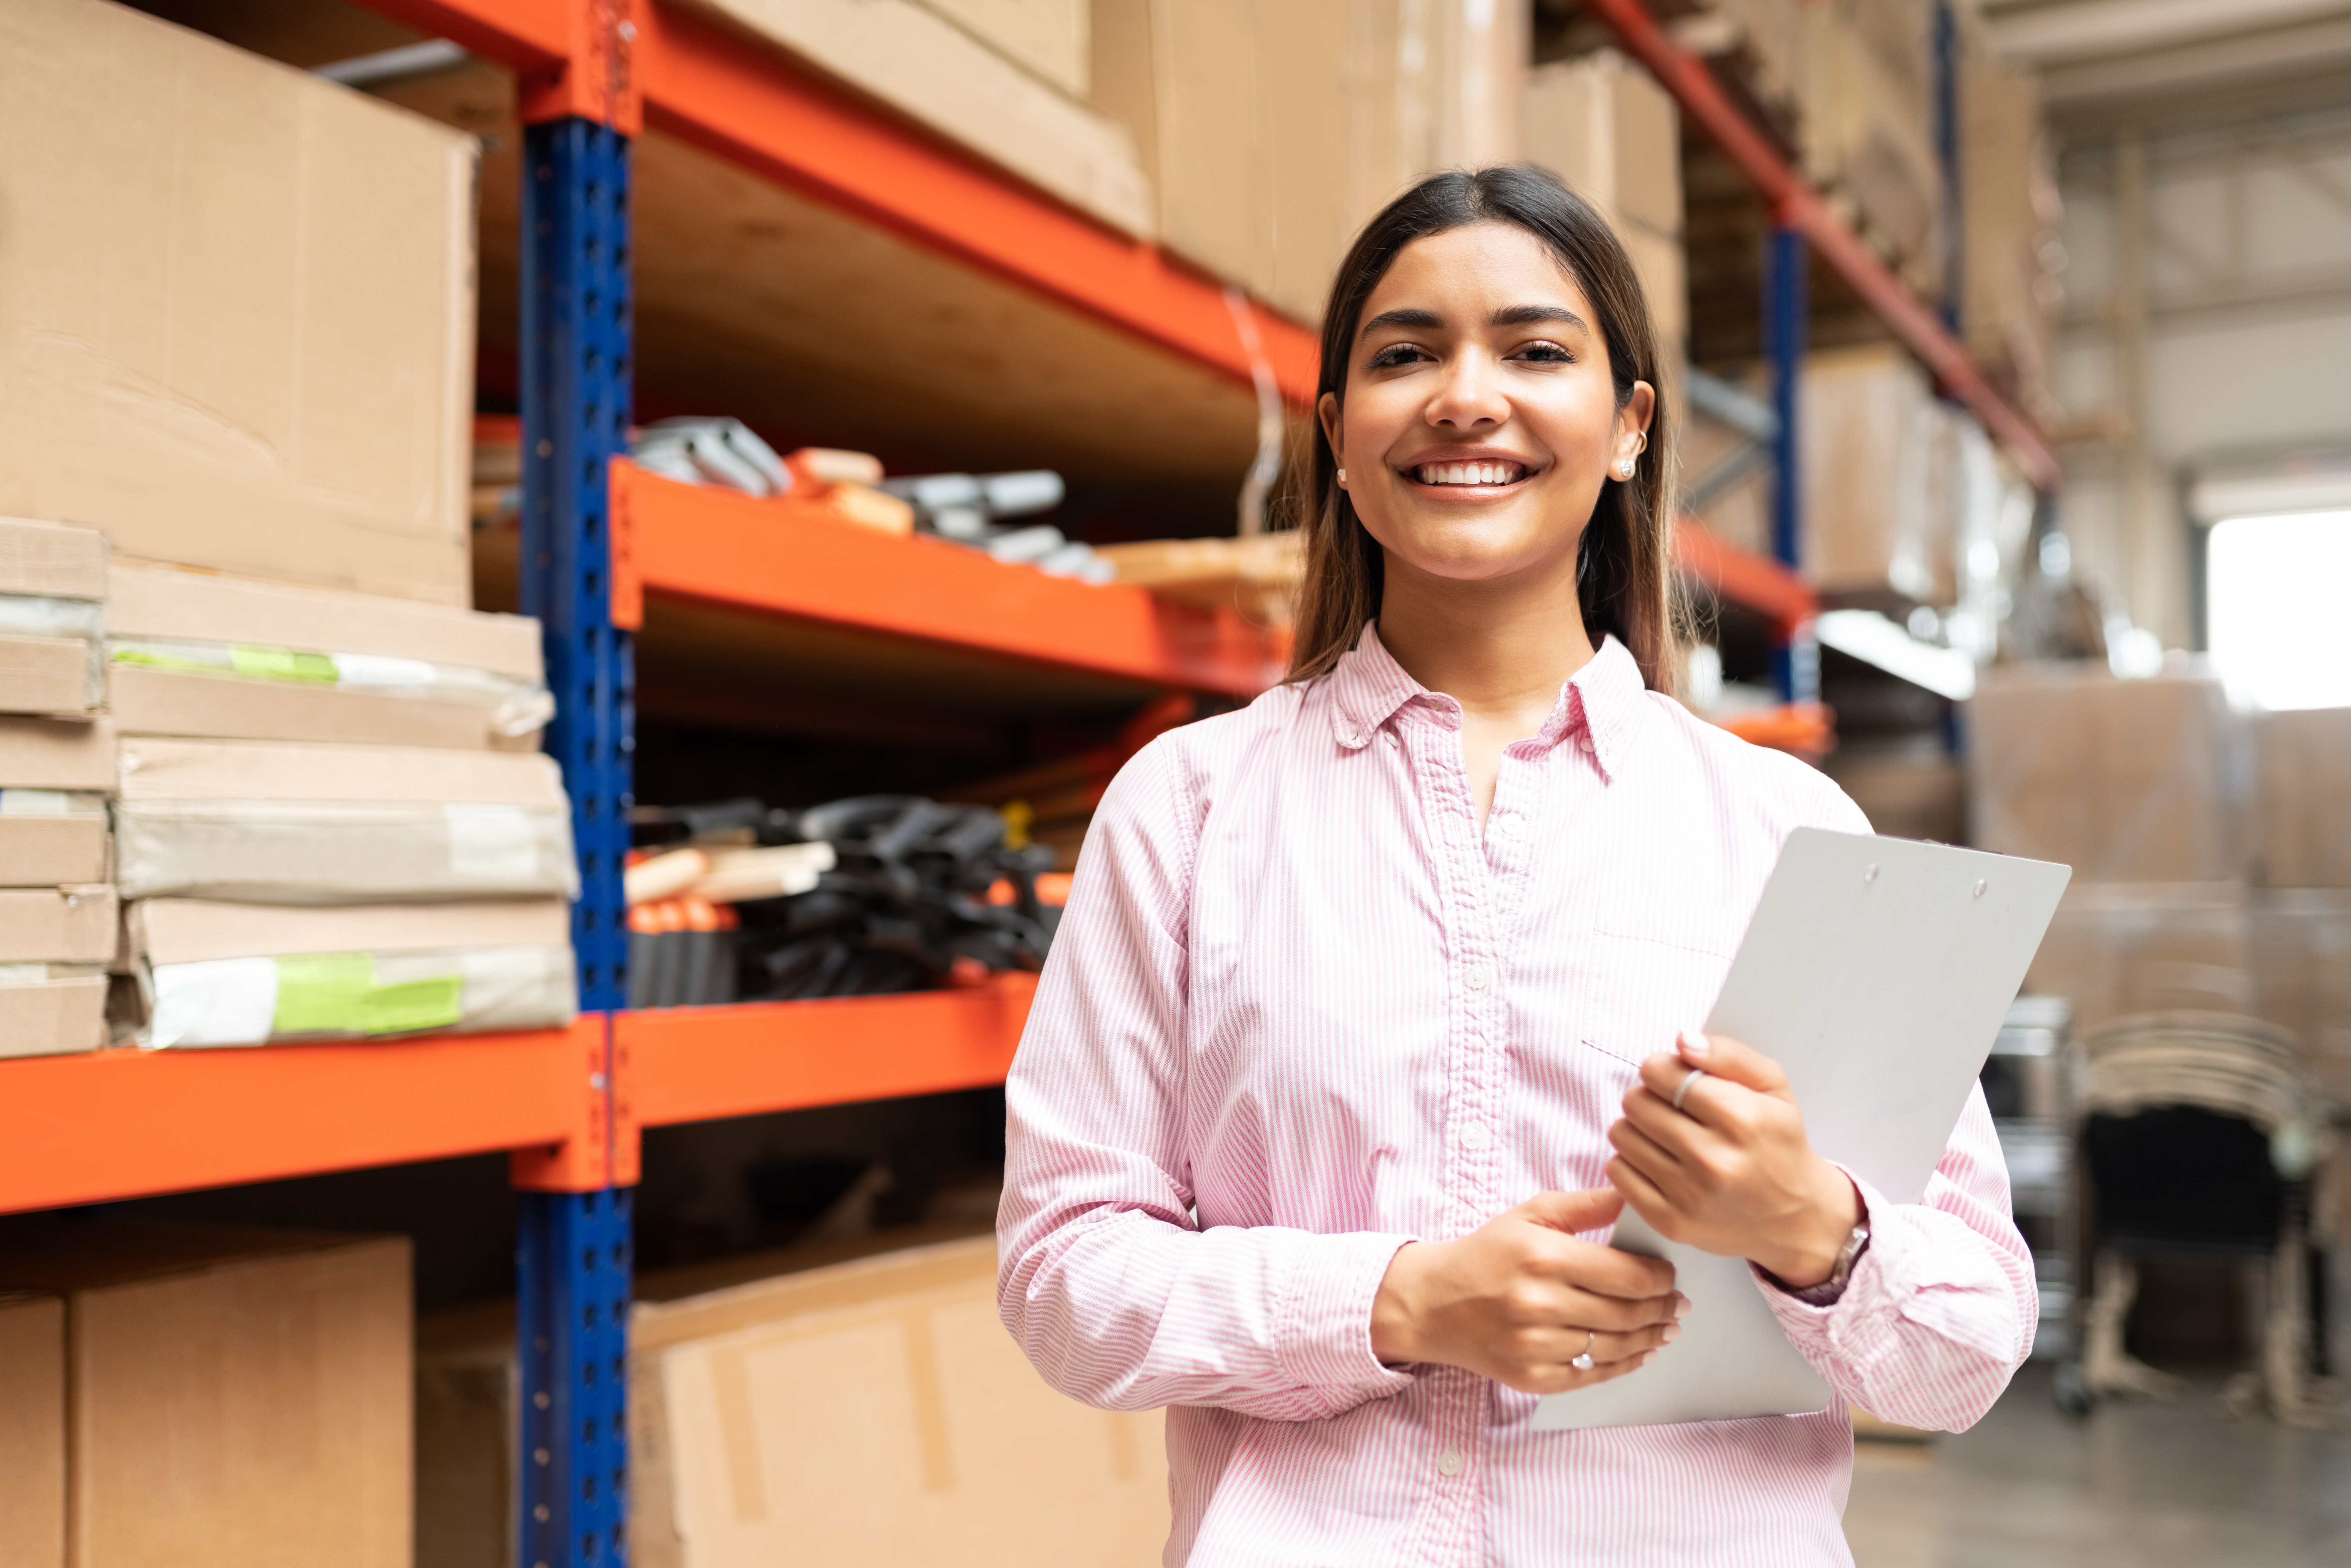 Smiling woman standing in warehouse holding inventory clipboard